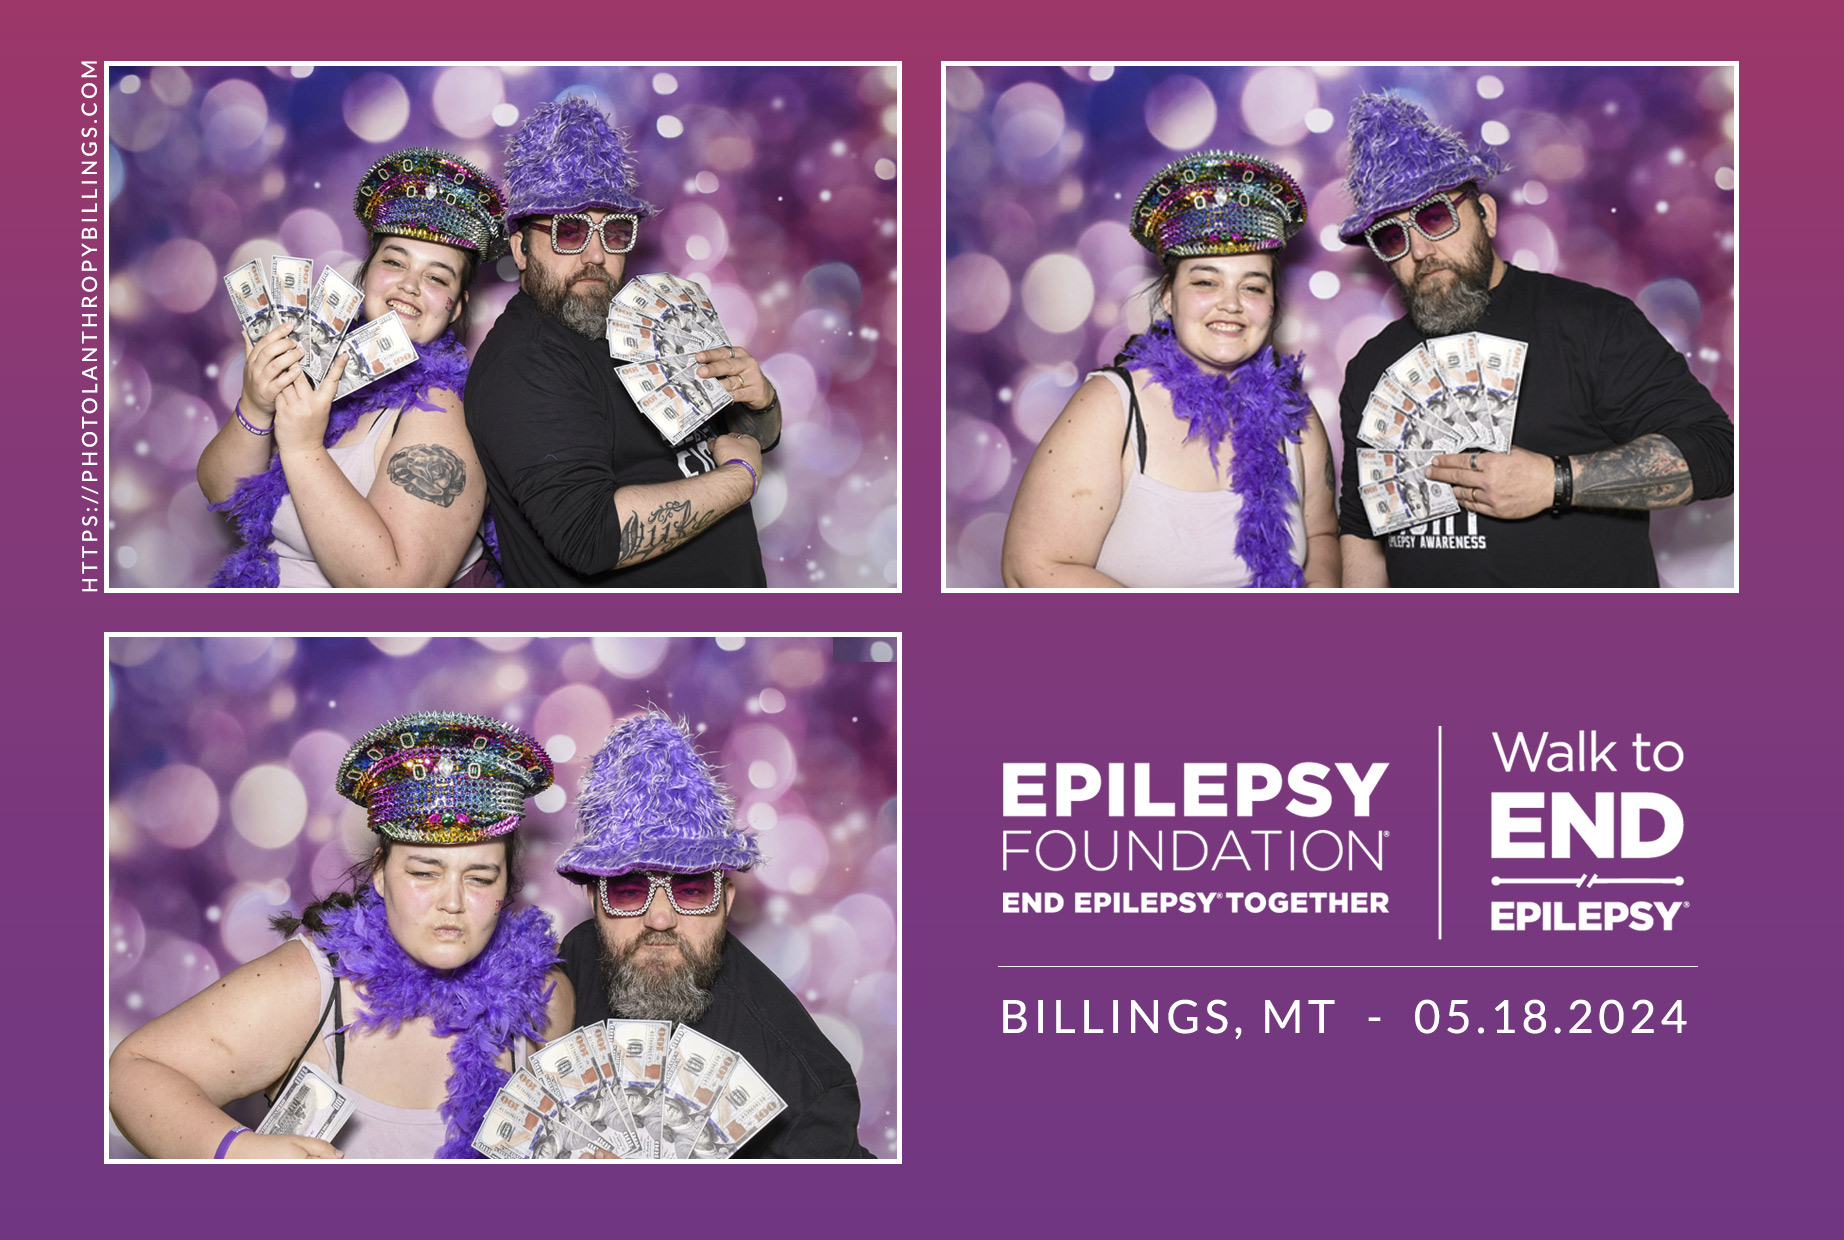 Sample photo from walk to end epilepsy